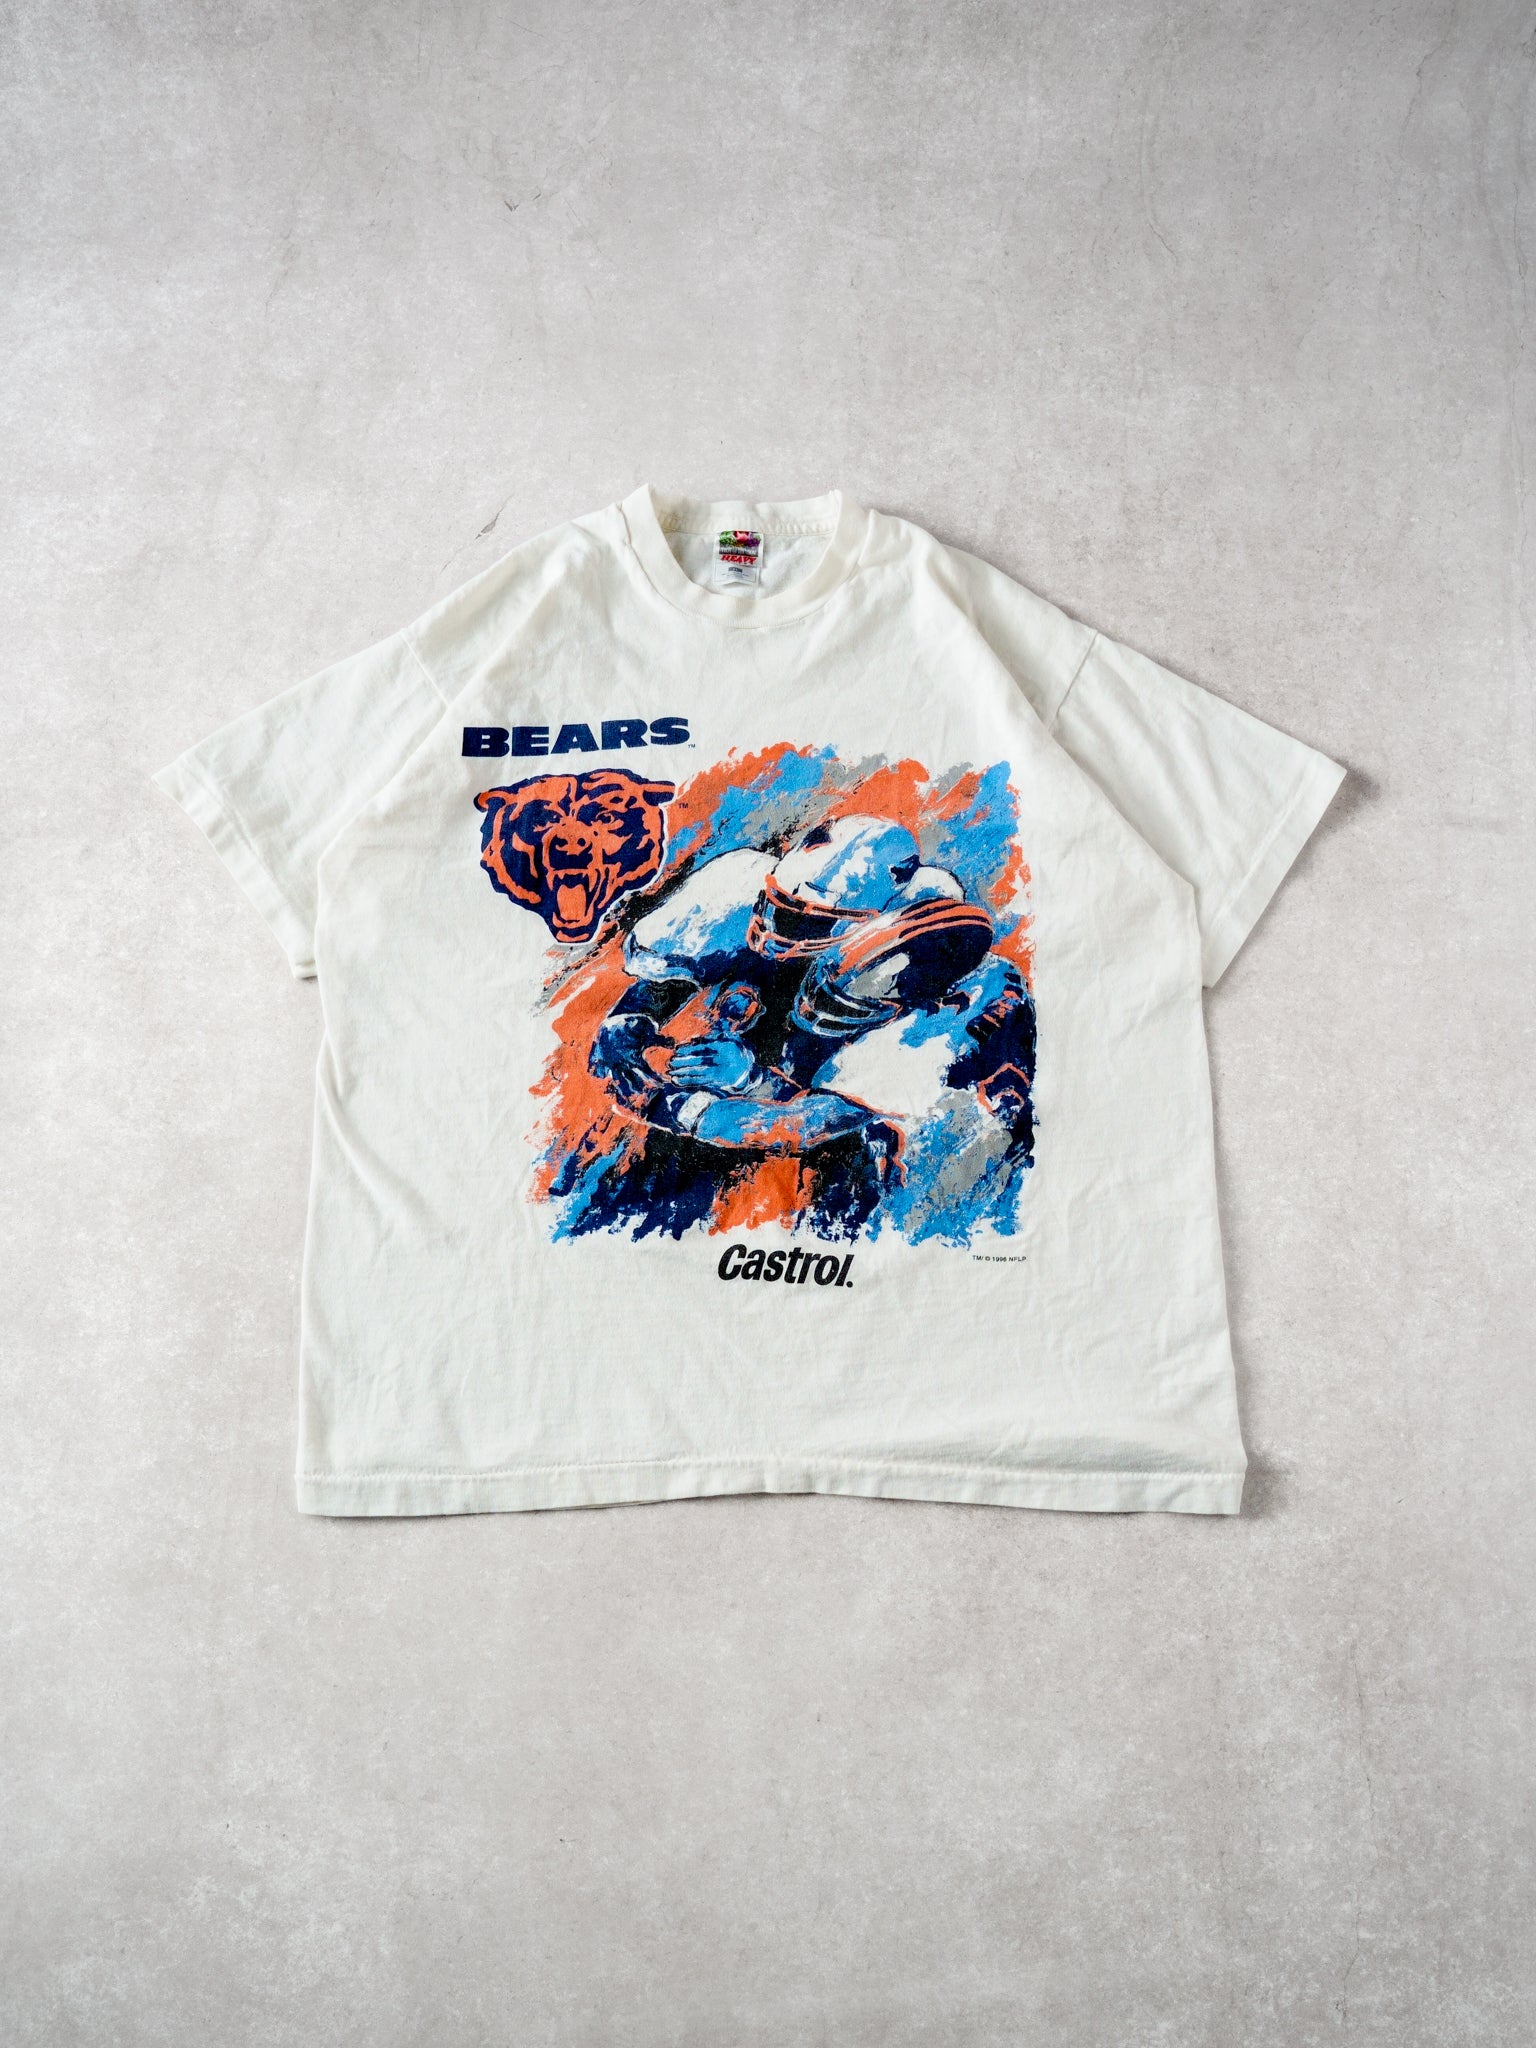 Vintage 96' White Chicago Bears NFL x Castrol Graphic Tee (M)